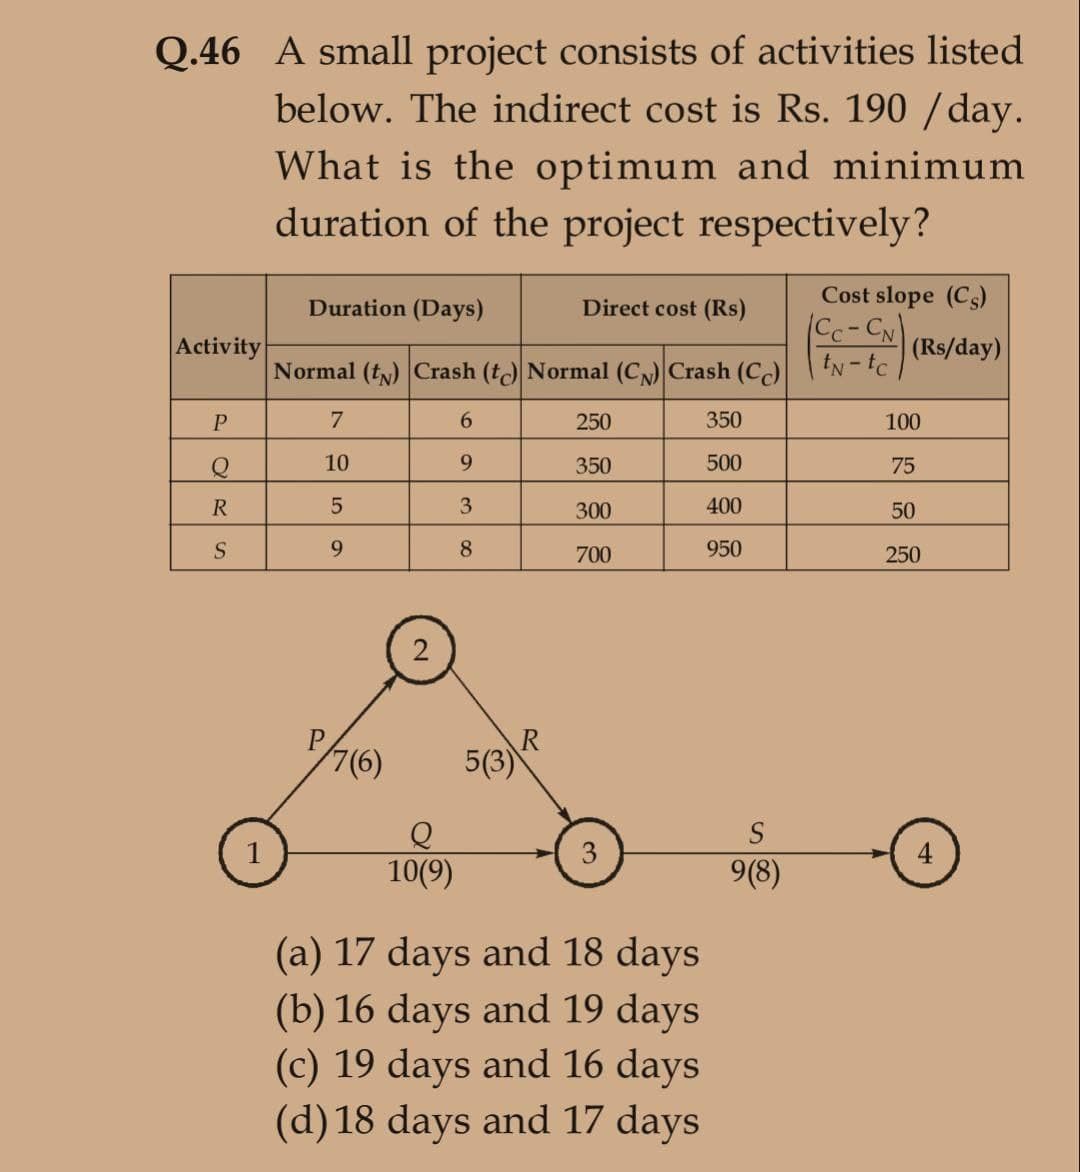 Q.46 A small project consists of activities listed
below. The indirect cost is Rs. 190 /day.
What is the optimum and minimum
duration of the project respectively?
Cost slope (Cs)
Duration (Days)
Direct cost (Rs)
Cc-CN)
Activity
(Rs/day)
Normal (ty) Crash (t Normal (CN) Crash (C)
7
6.
250
350
100
Q
10
9.
350
500
75
R
3.
300
400
50
9
8.
700
950
250
7(6)
5(3)
S
4.
10(9)
9(8)
(a) 17 days and 18 days
(b) 16 days and 19 days
(c) 19 days and 16 days
(d) 18 days and 17 days
2.
